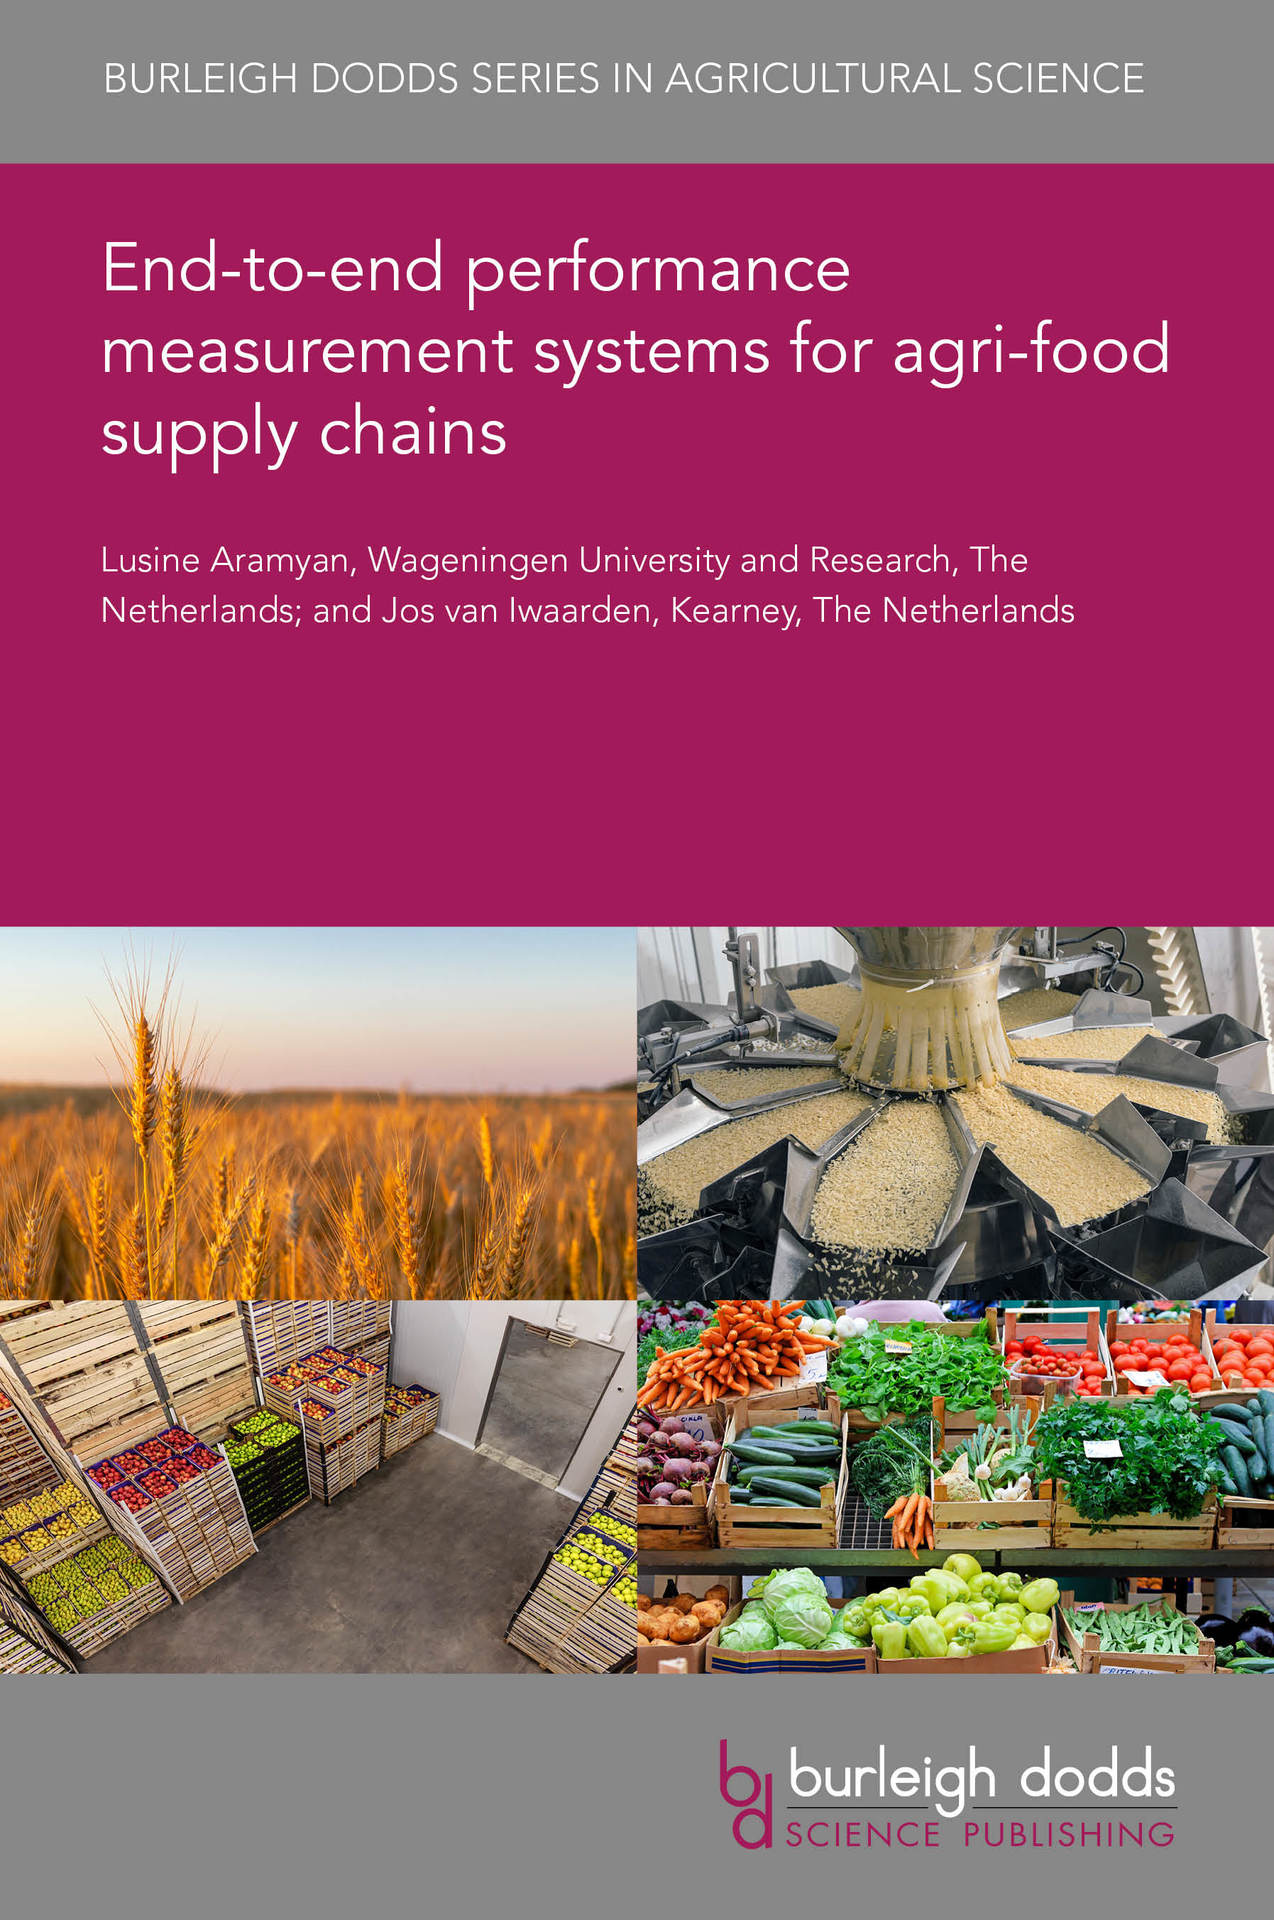 End-to-end performance measurement systems for agri-food supply chains